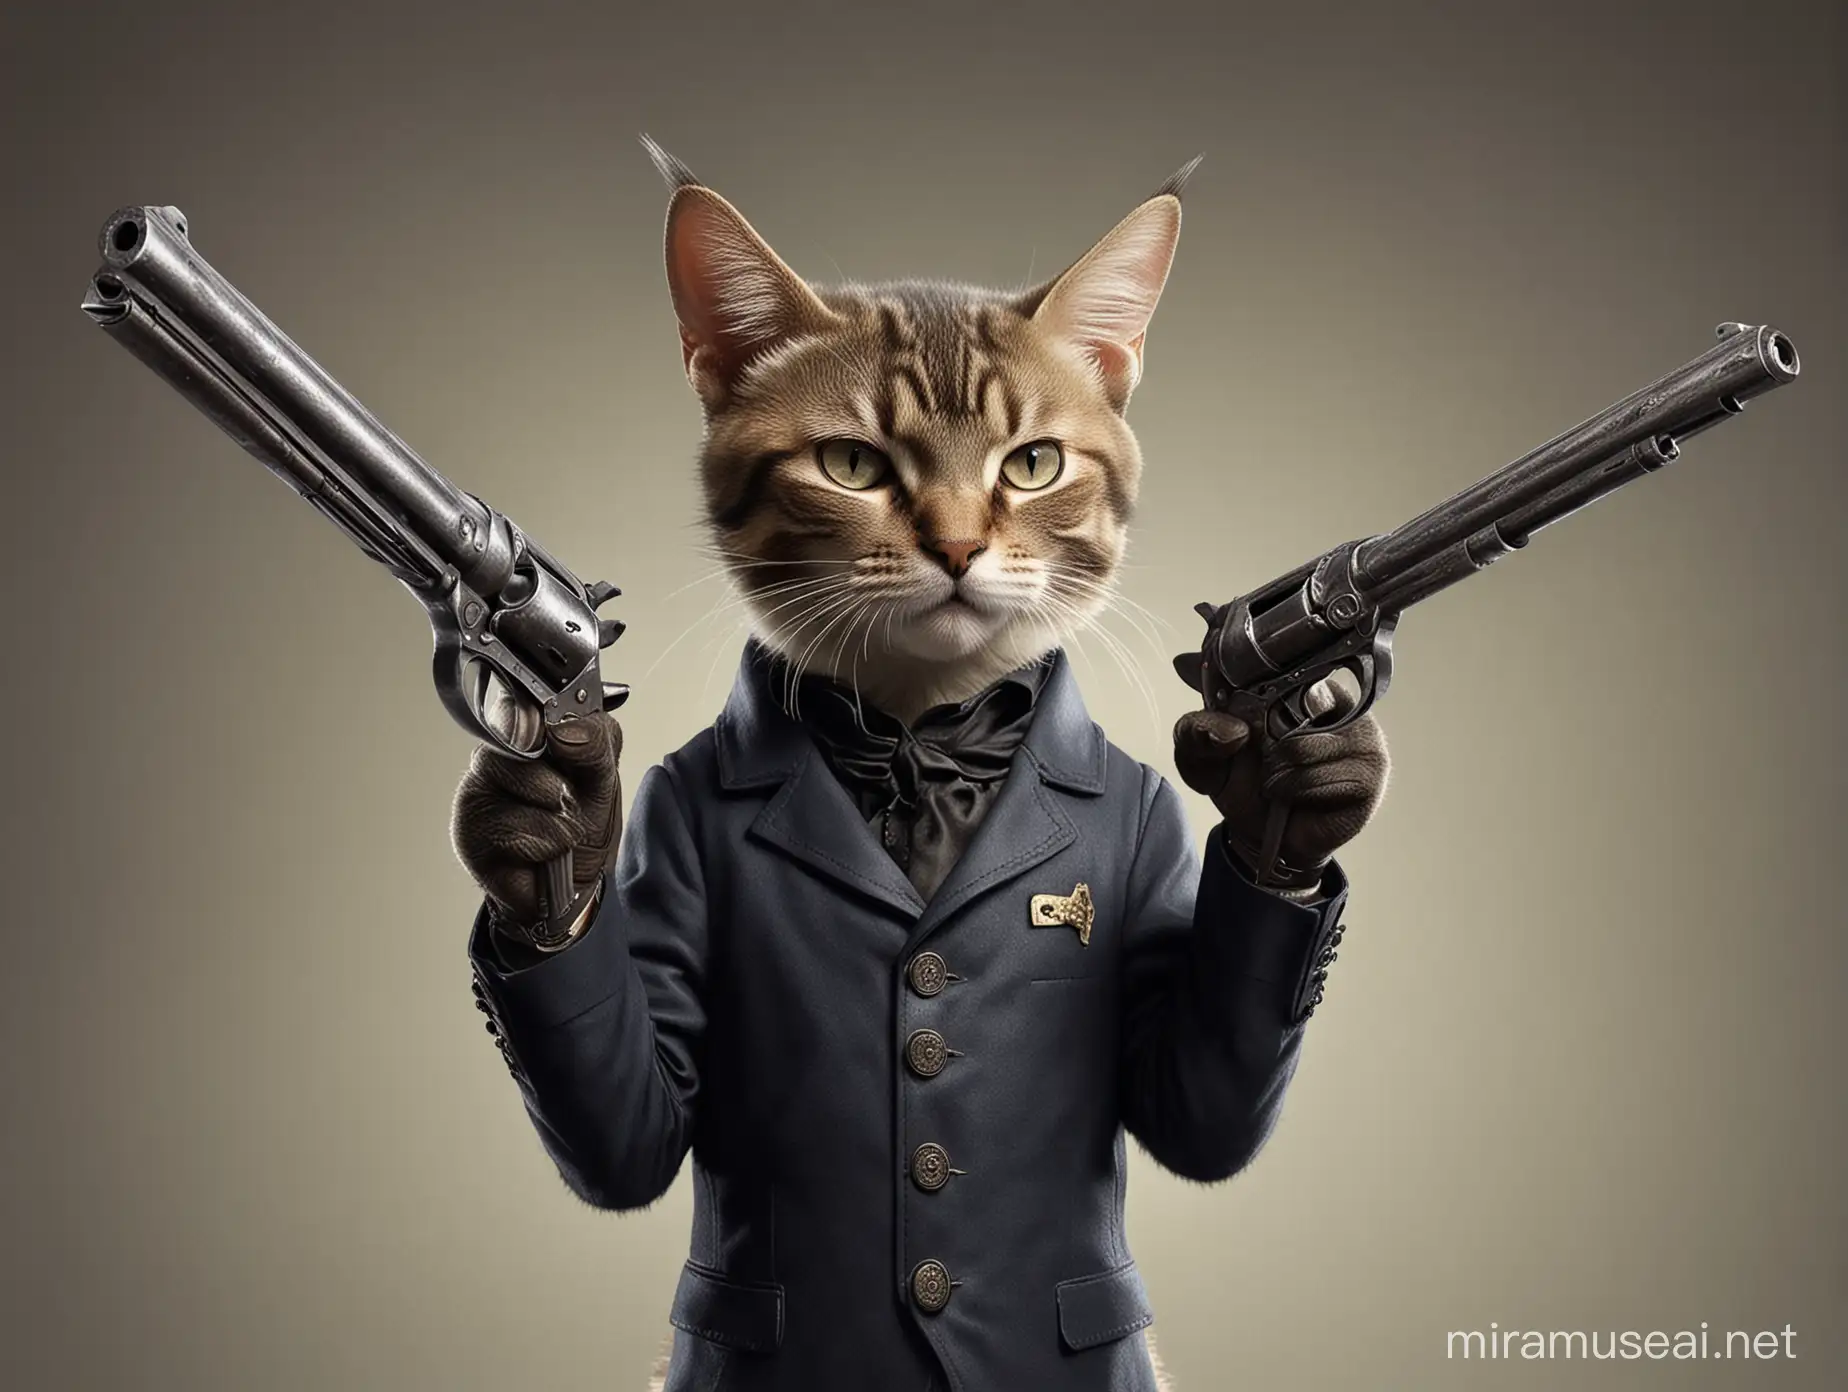 Sleek Cat Holding a Pointed Revolver